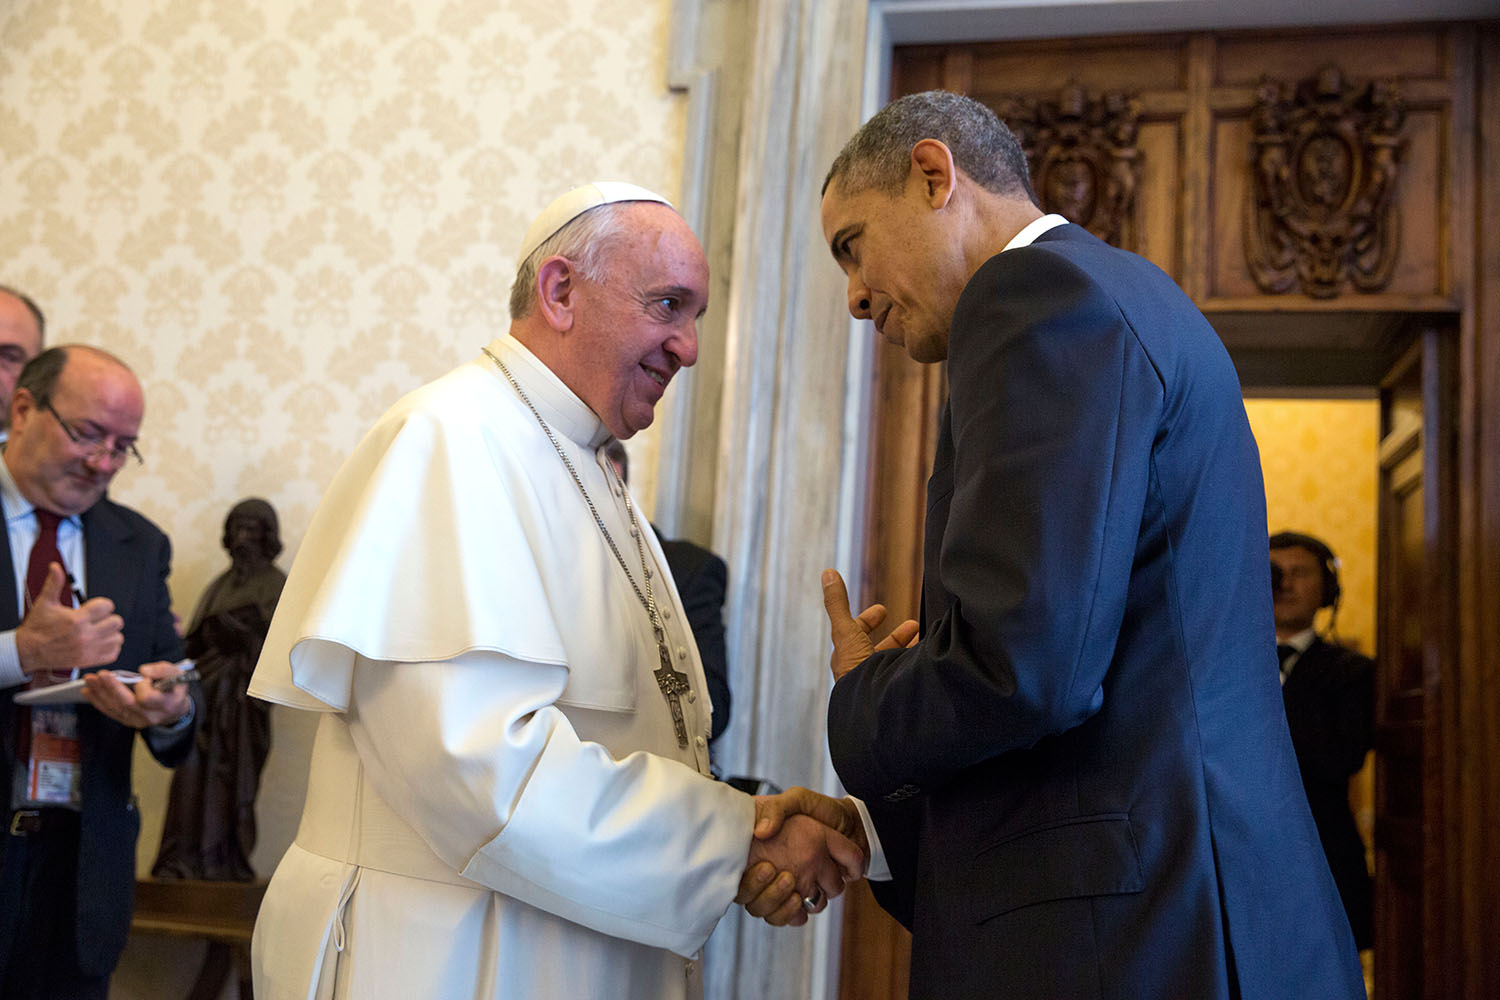 https://upload.wikimedia.org/wikipedia/commons/2/23/President_Barack_Obama_with_Pope_Francis_at_the_Vatican%2C_March_27%2C_2014.jpg